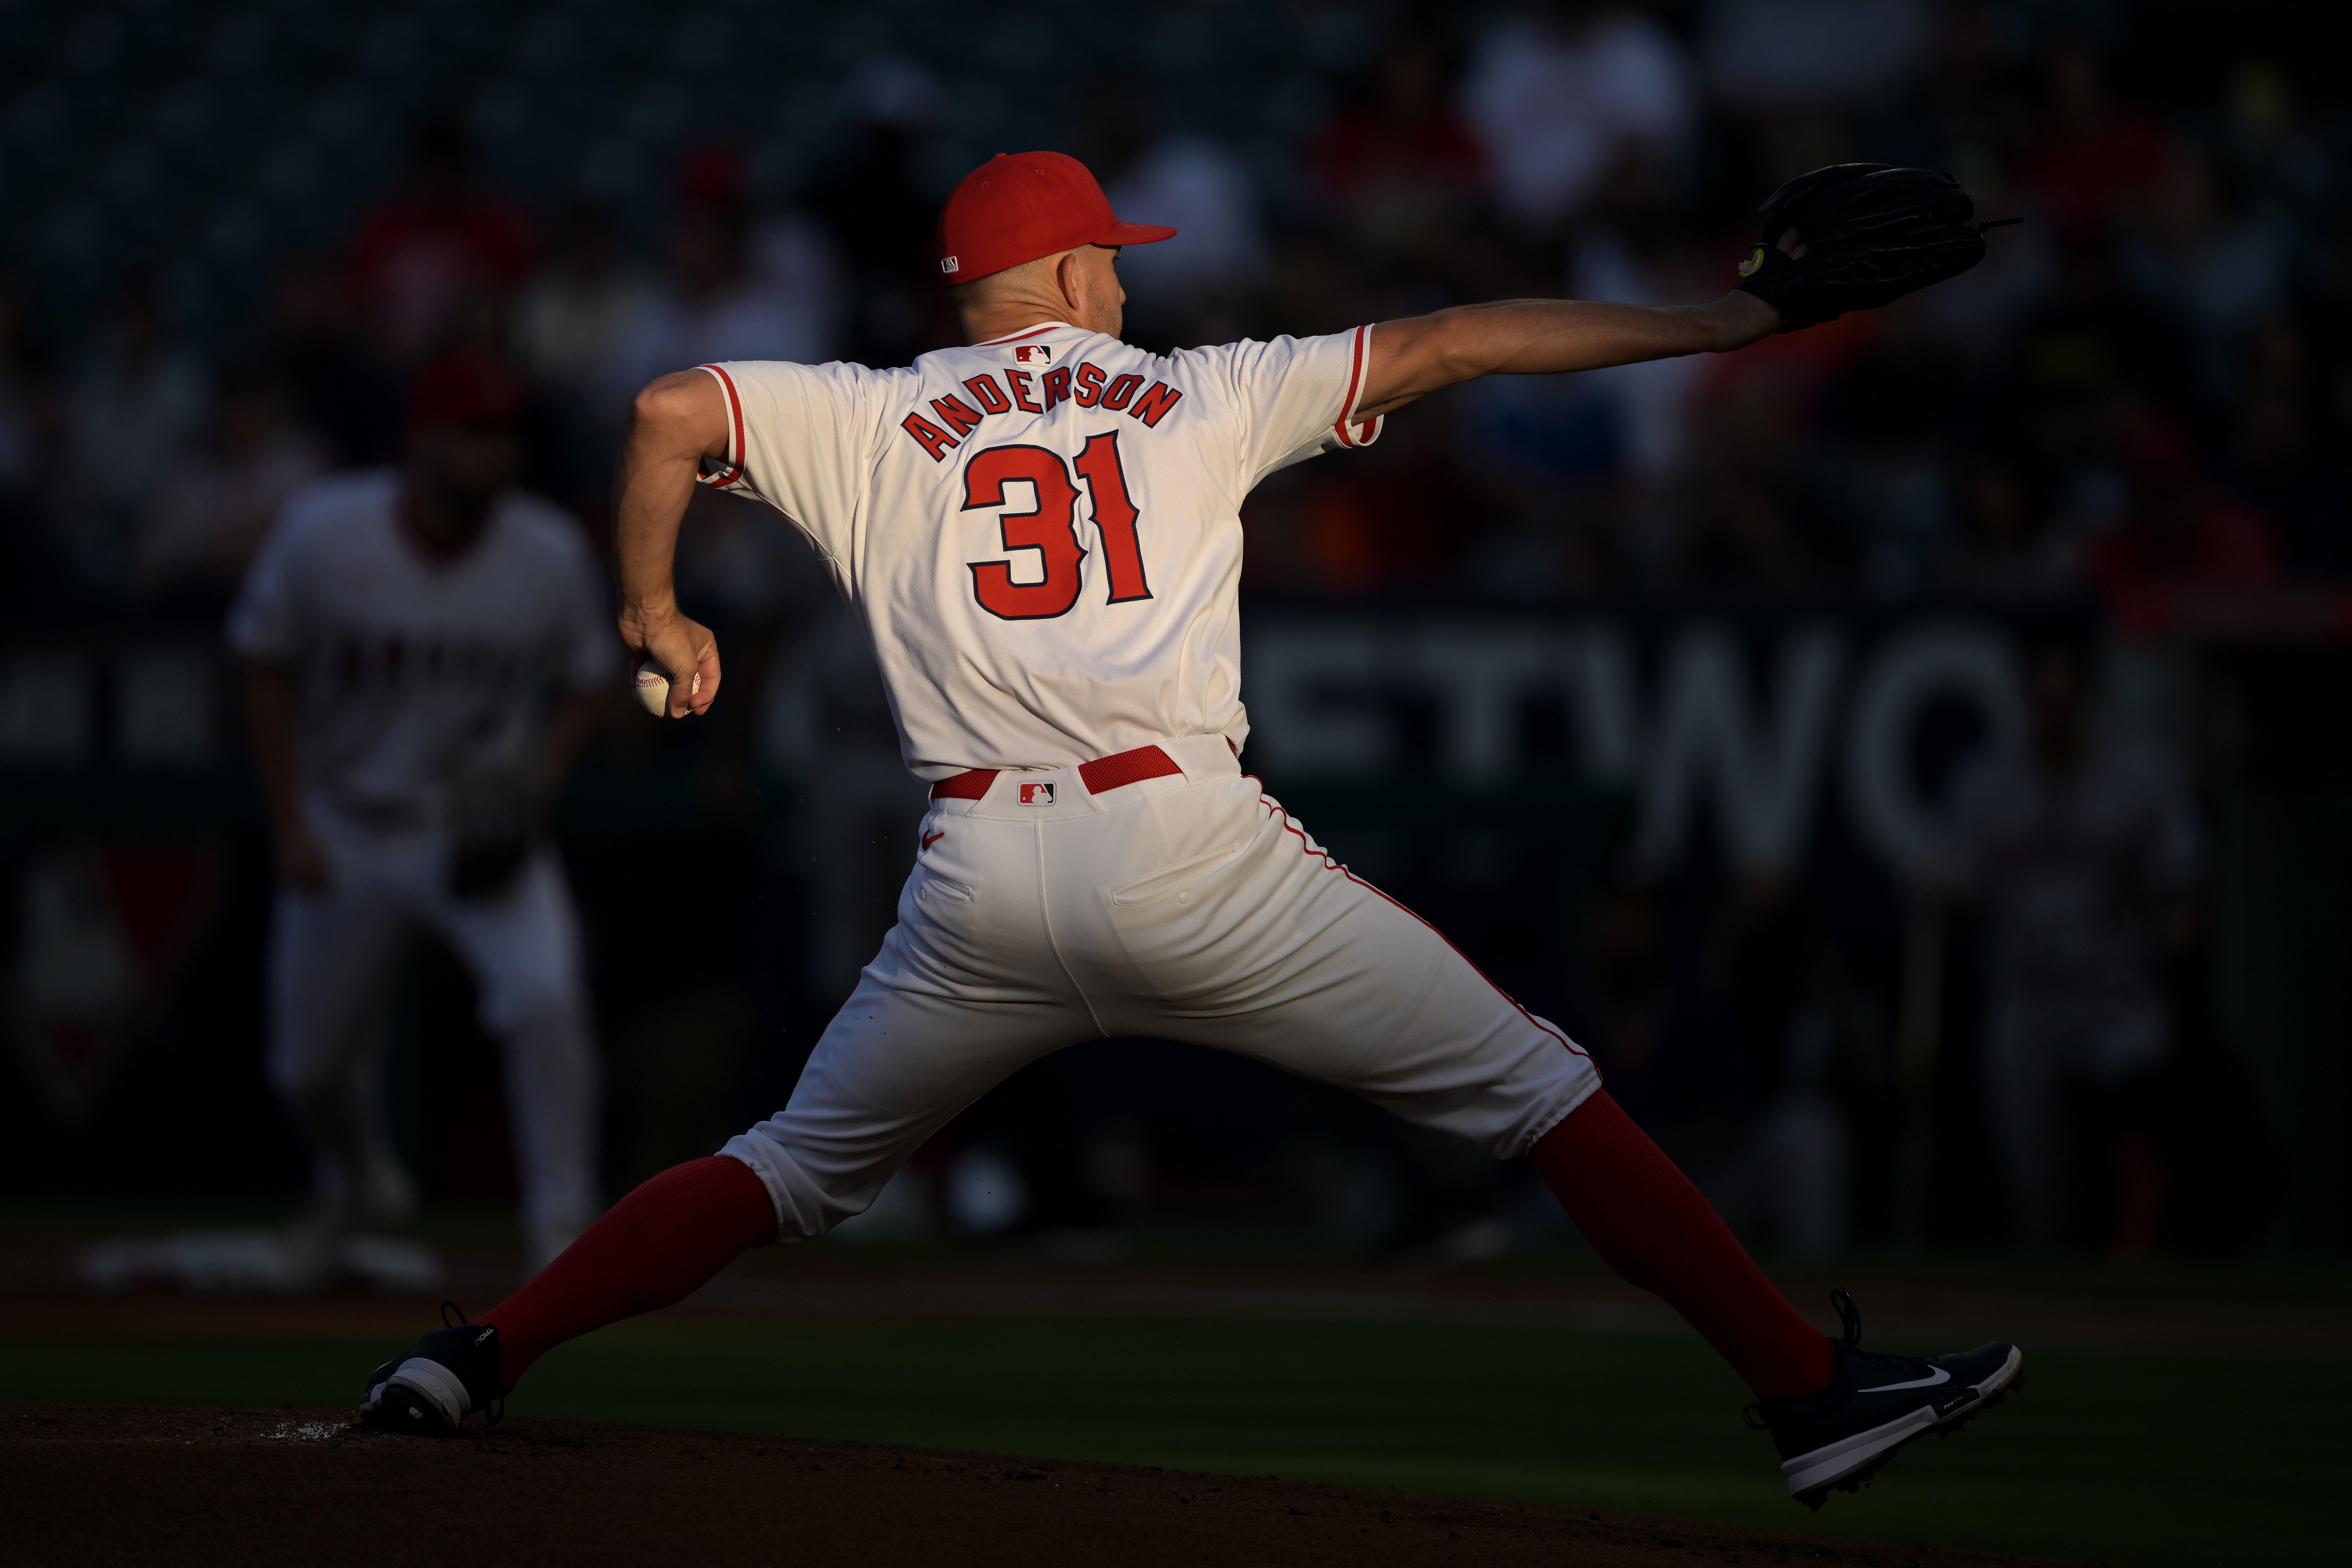 Los Angeles Angels - Tyler Anderson (Image via USA Today)